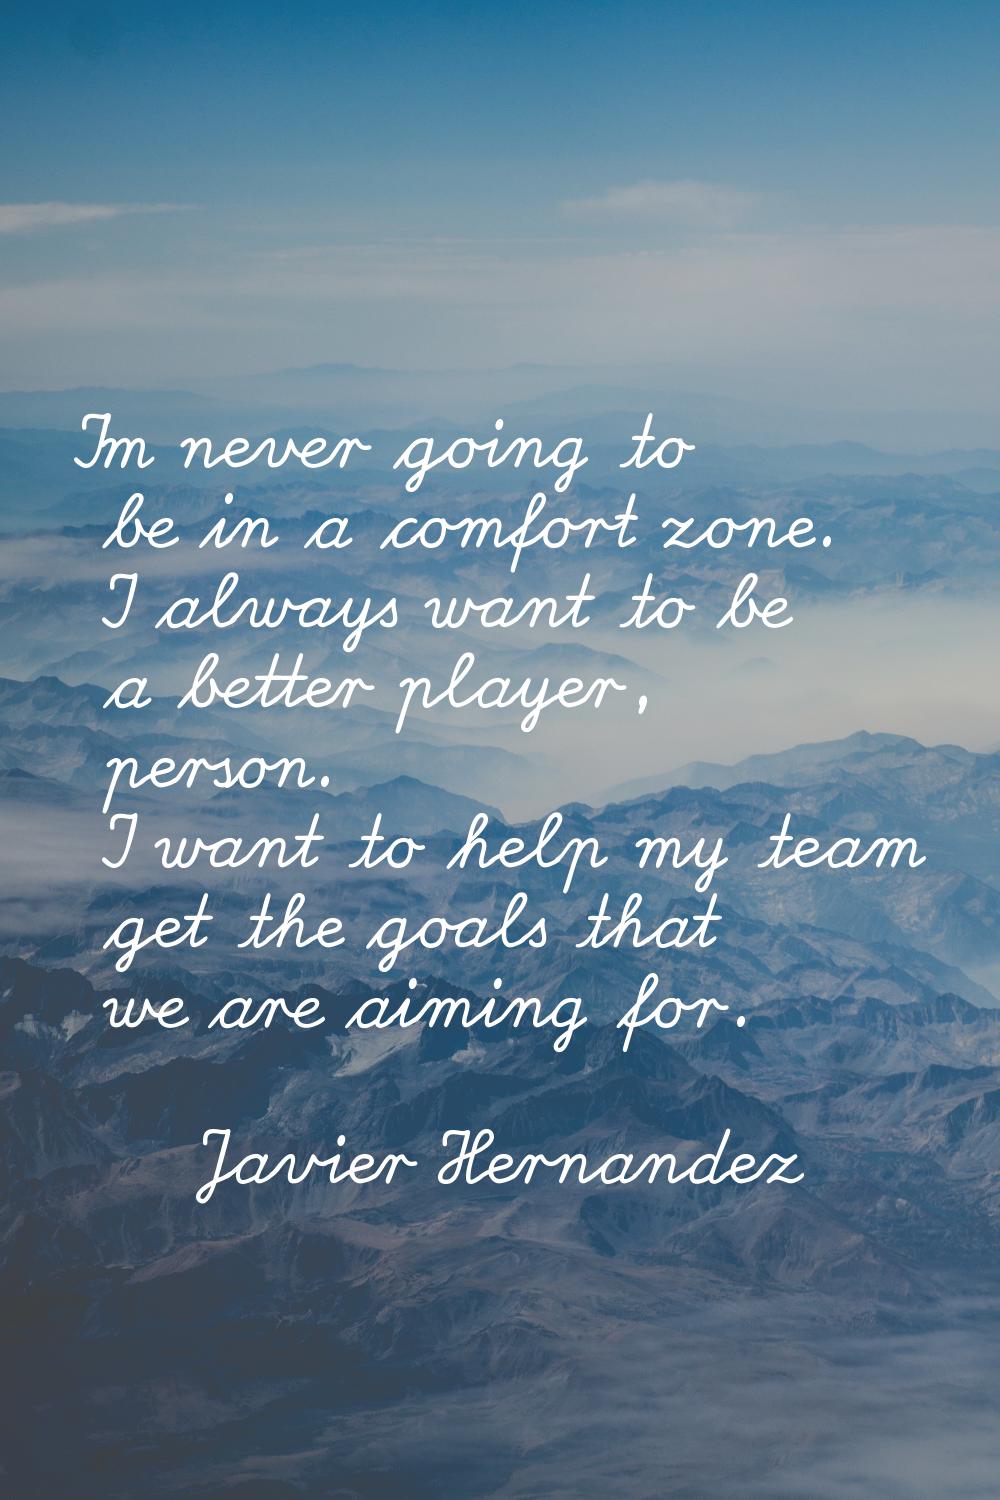 I'm never going to be in a comfort zone. I always want to be a better player, person. I want to hel